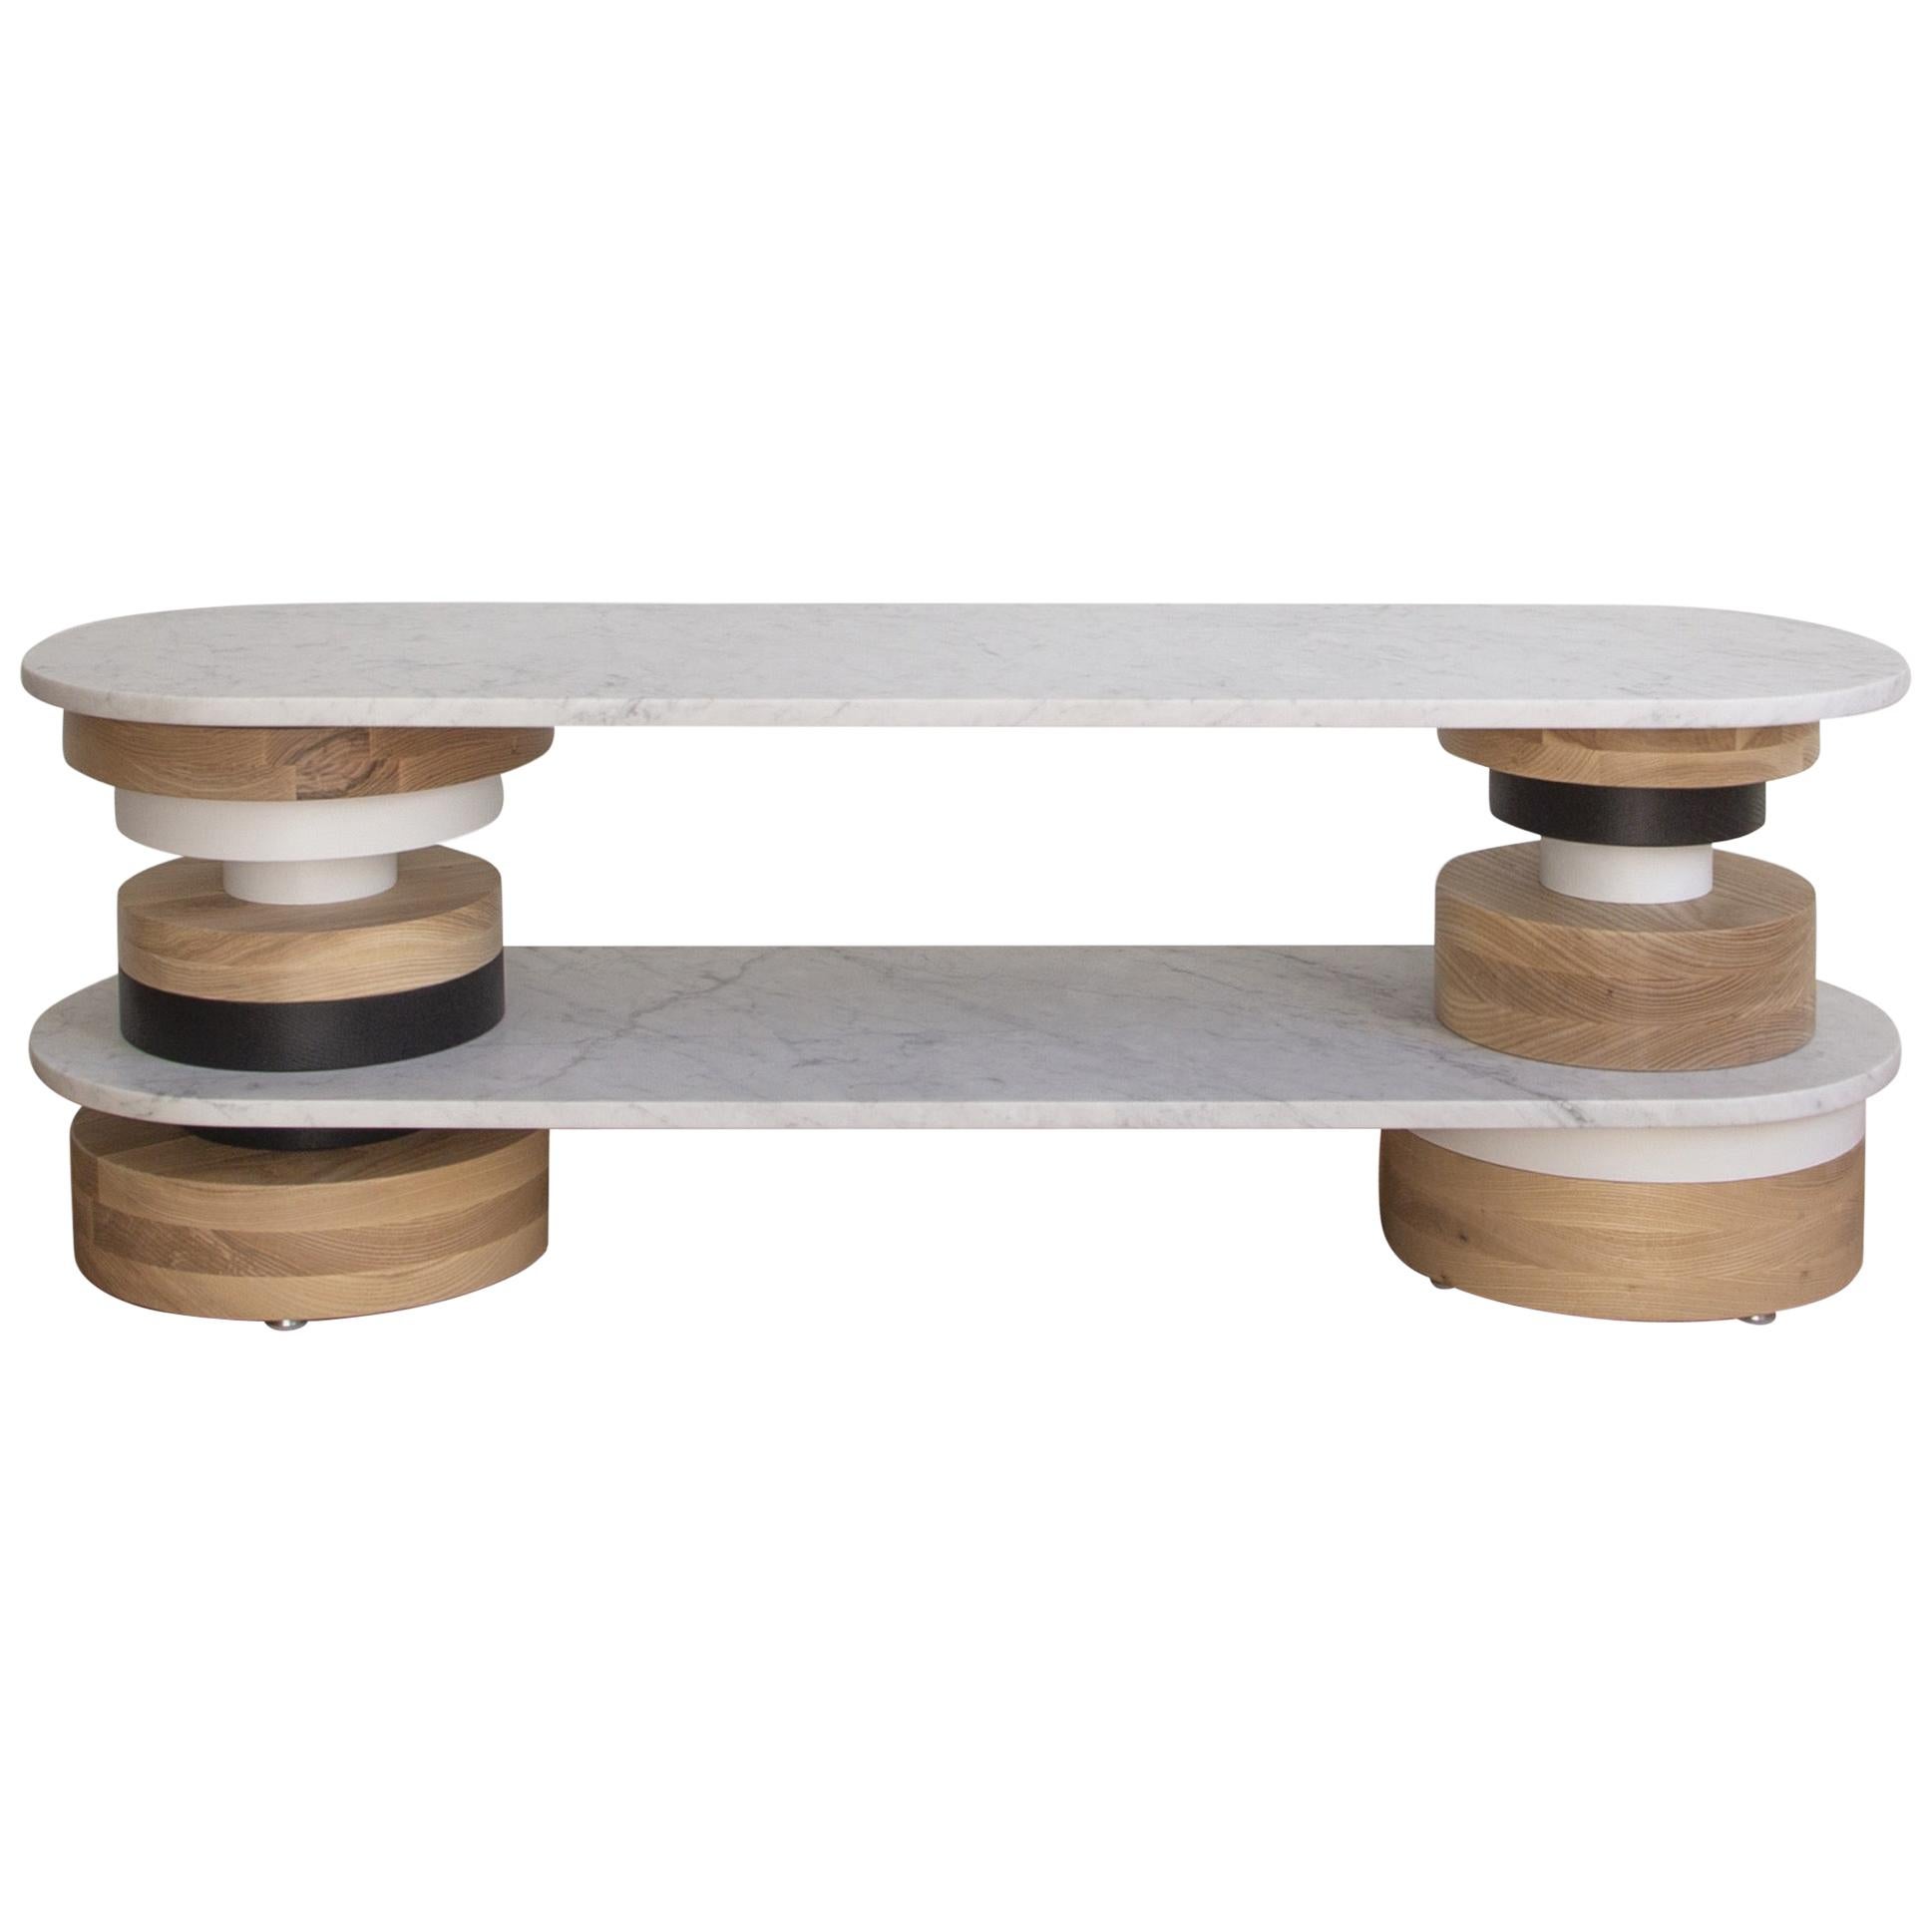 Customizable Low Sass Console Table from Souda, White Marble Top, Entryway Table